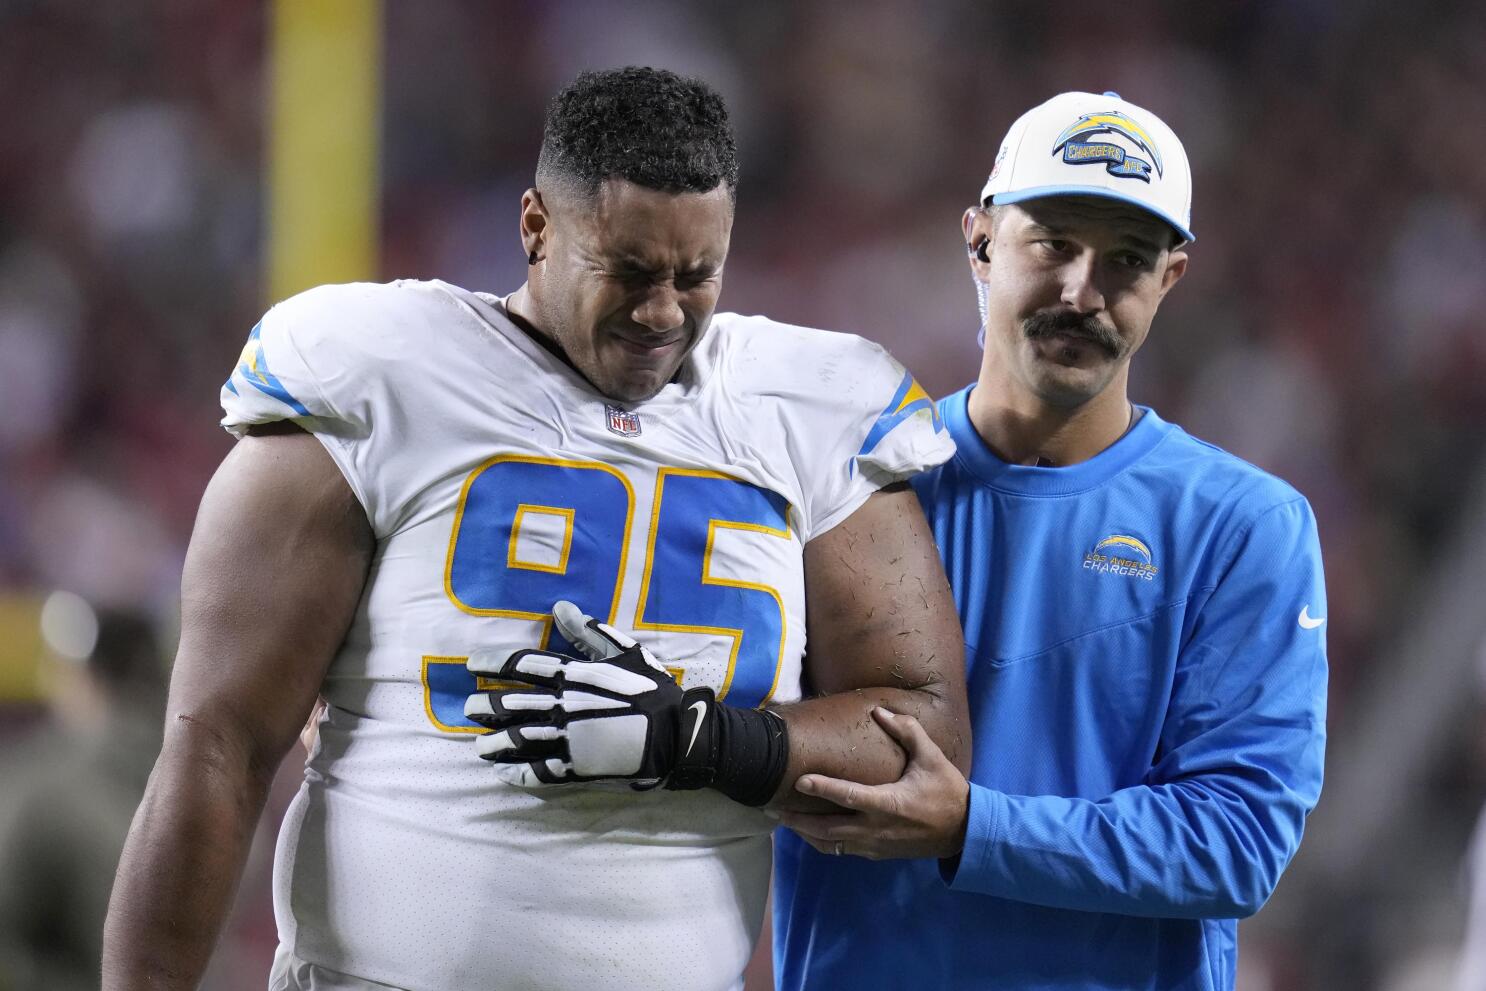 D-line becomes latest Chargers position plagued by injuries